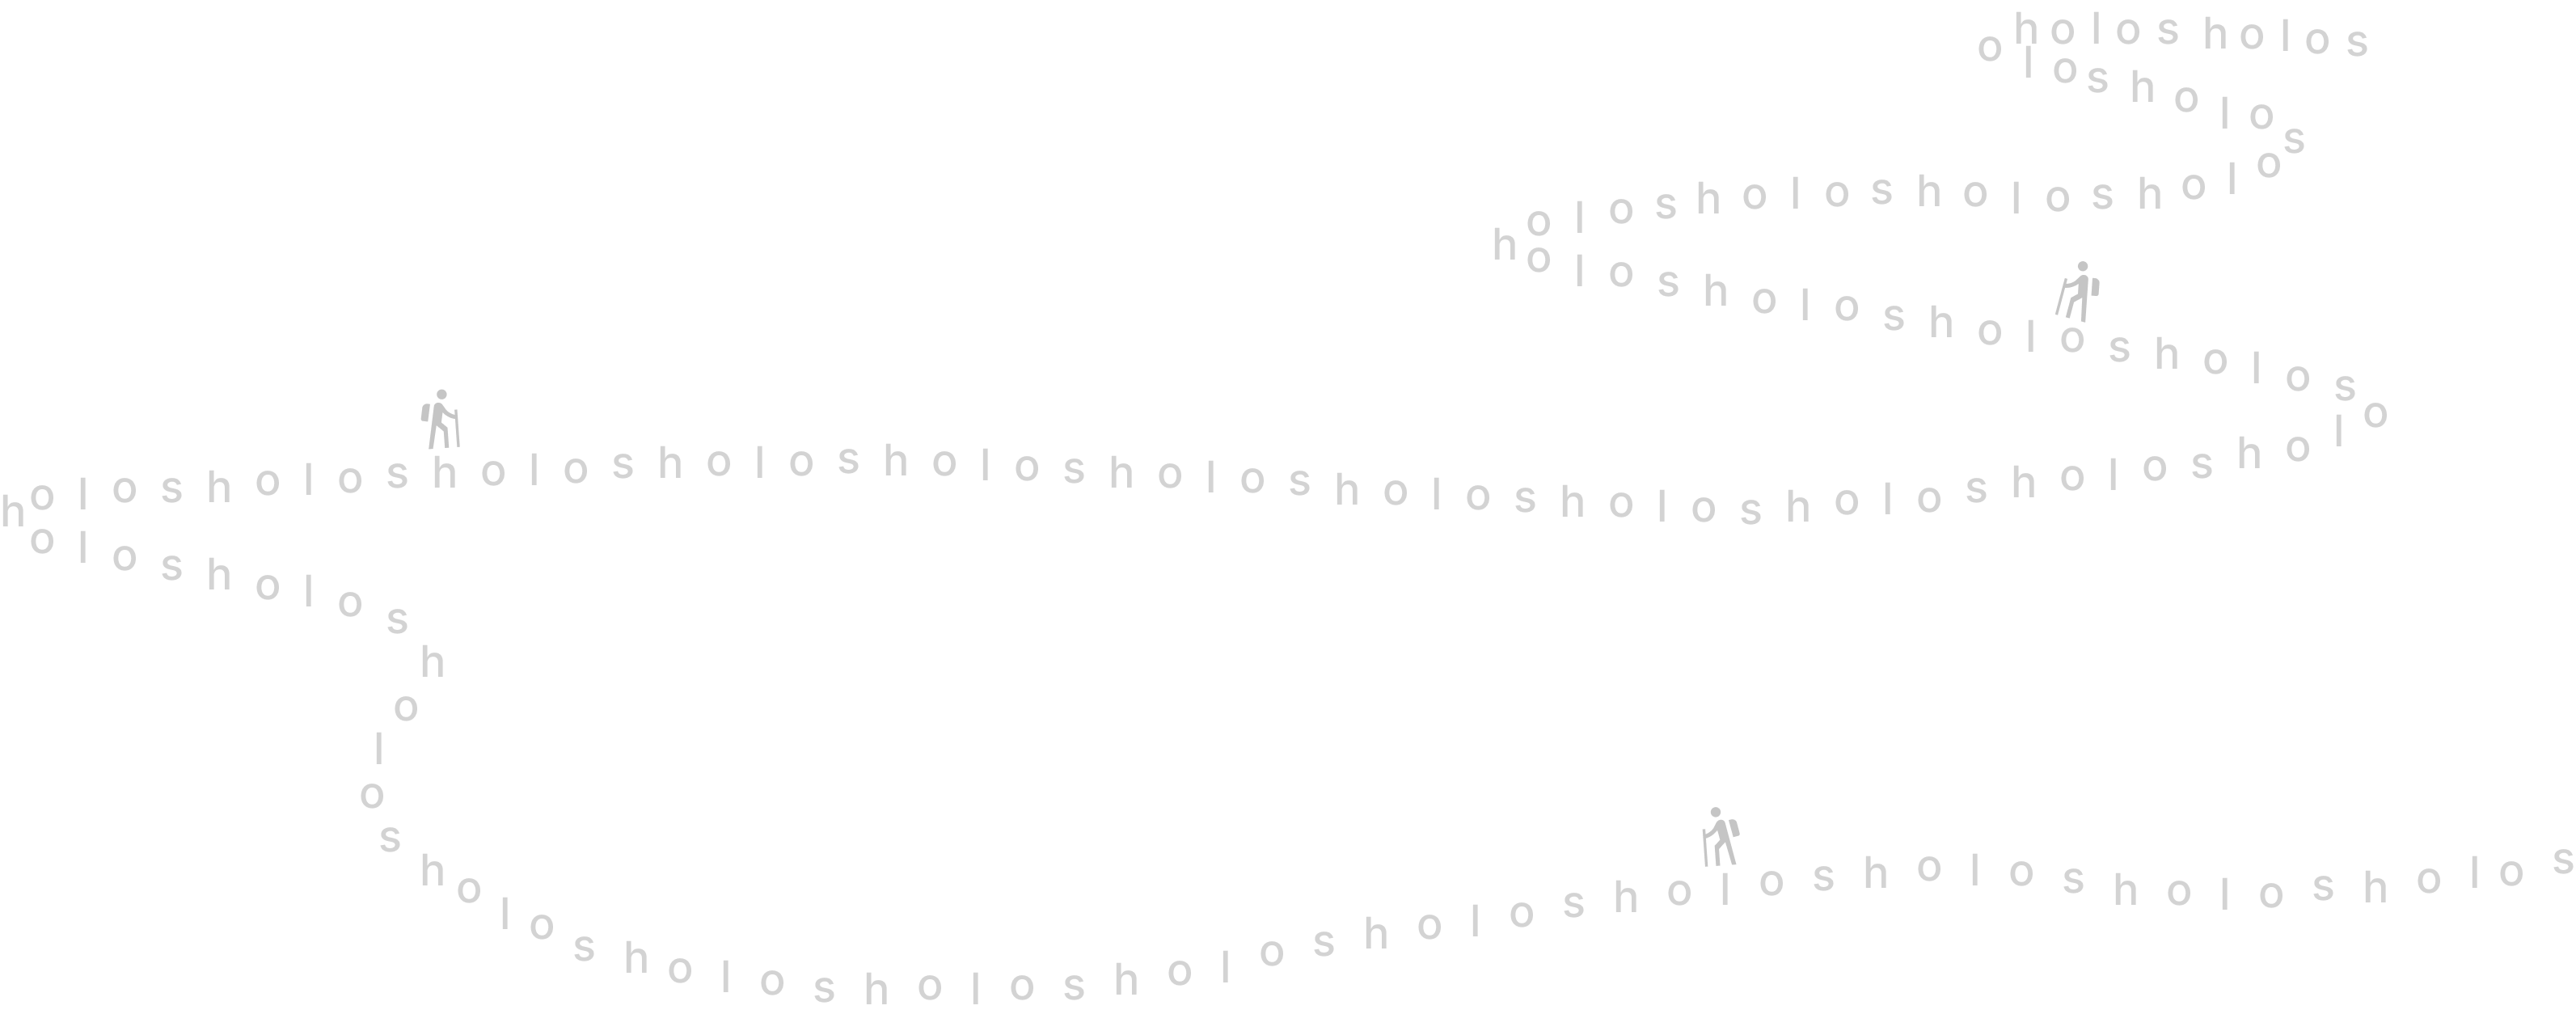 Illustration of hikers on a path that is made up of the letters H-O-L-O-S